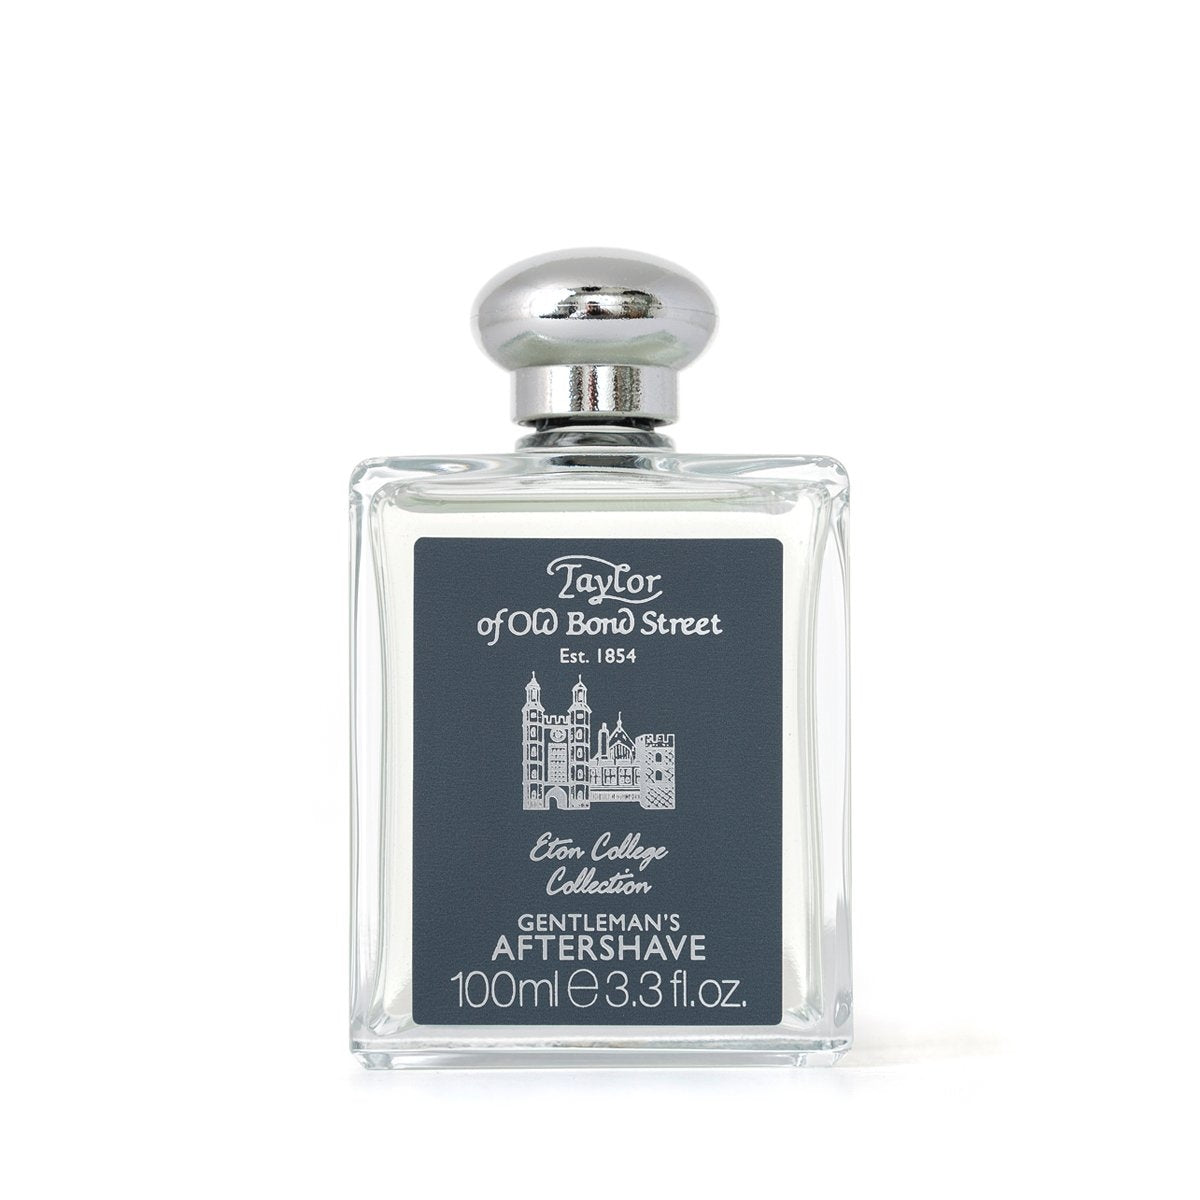 Taylor of old Bond Street Scent Aftershave Eton | The College English